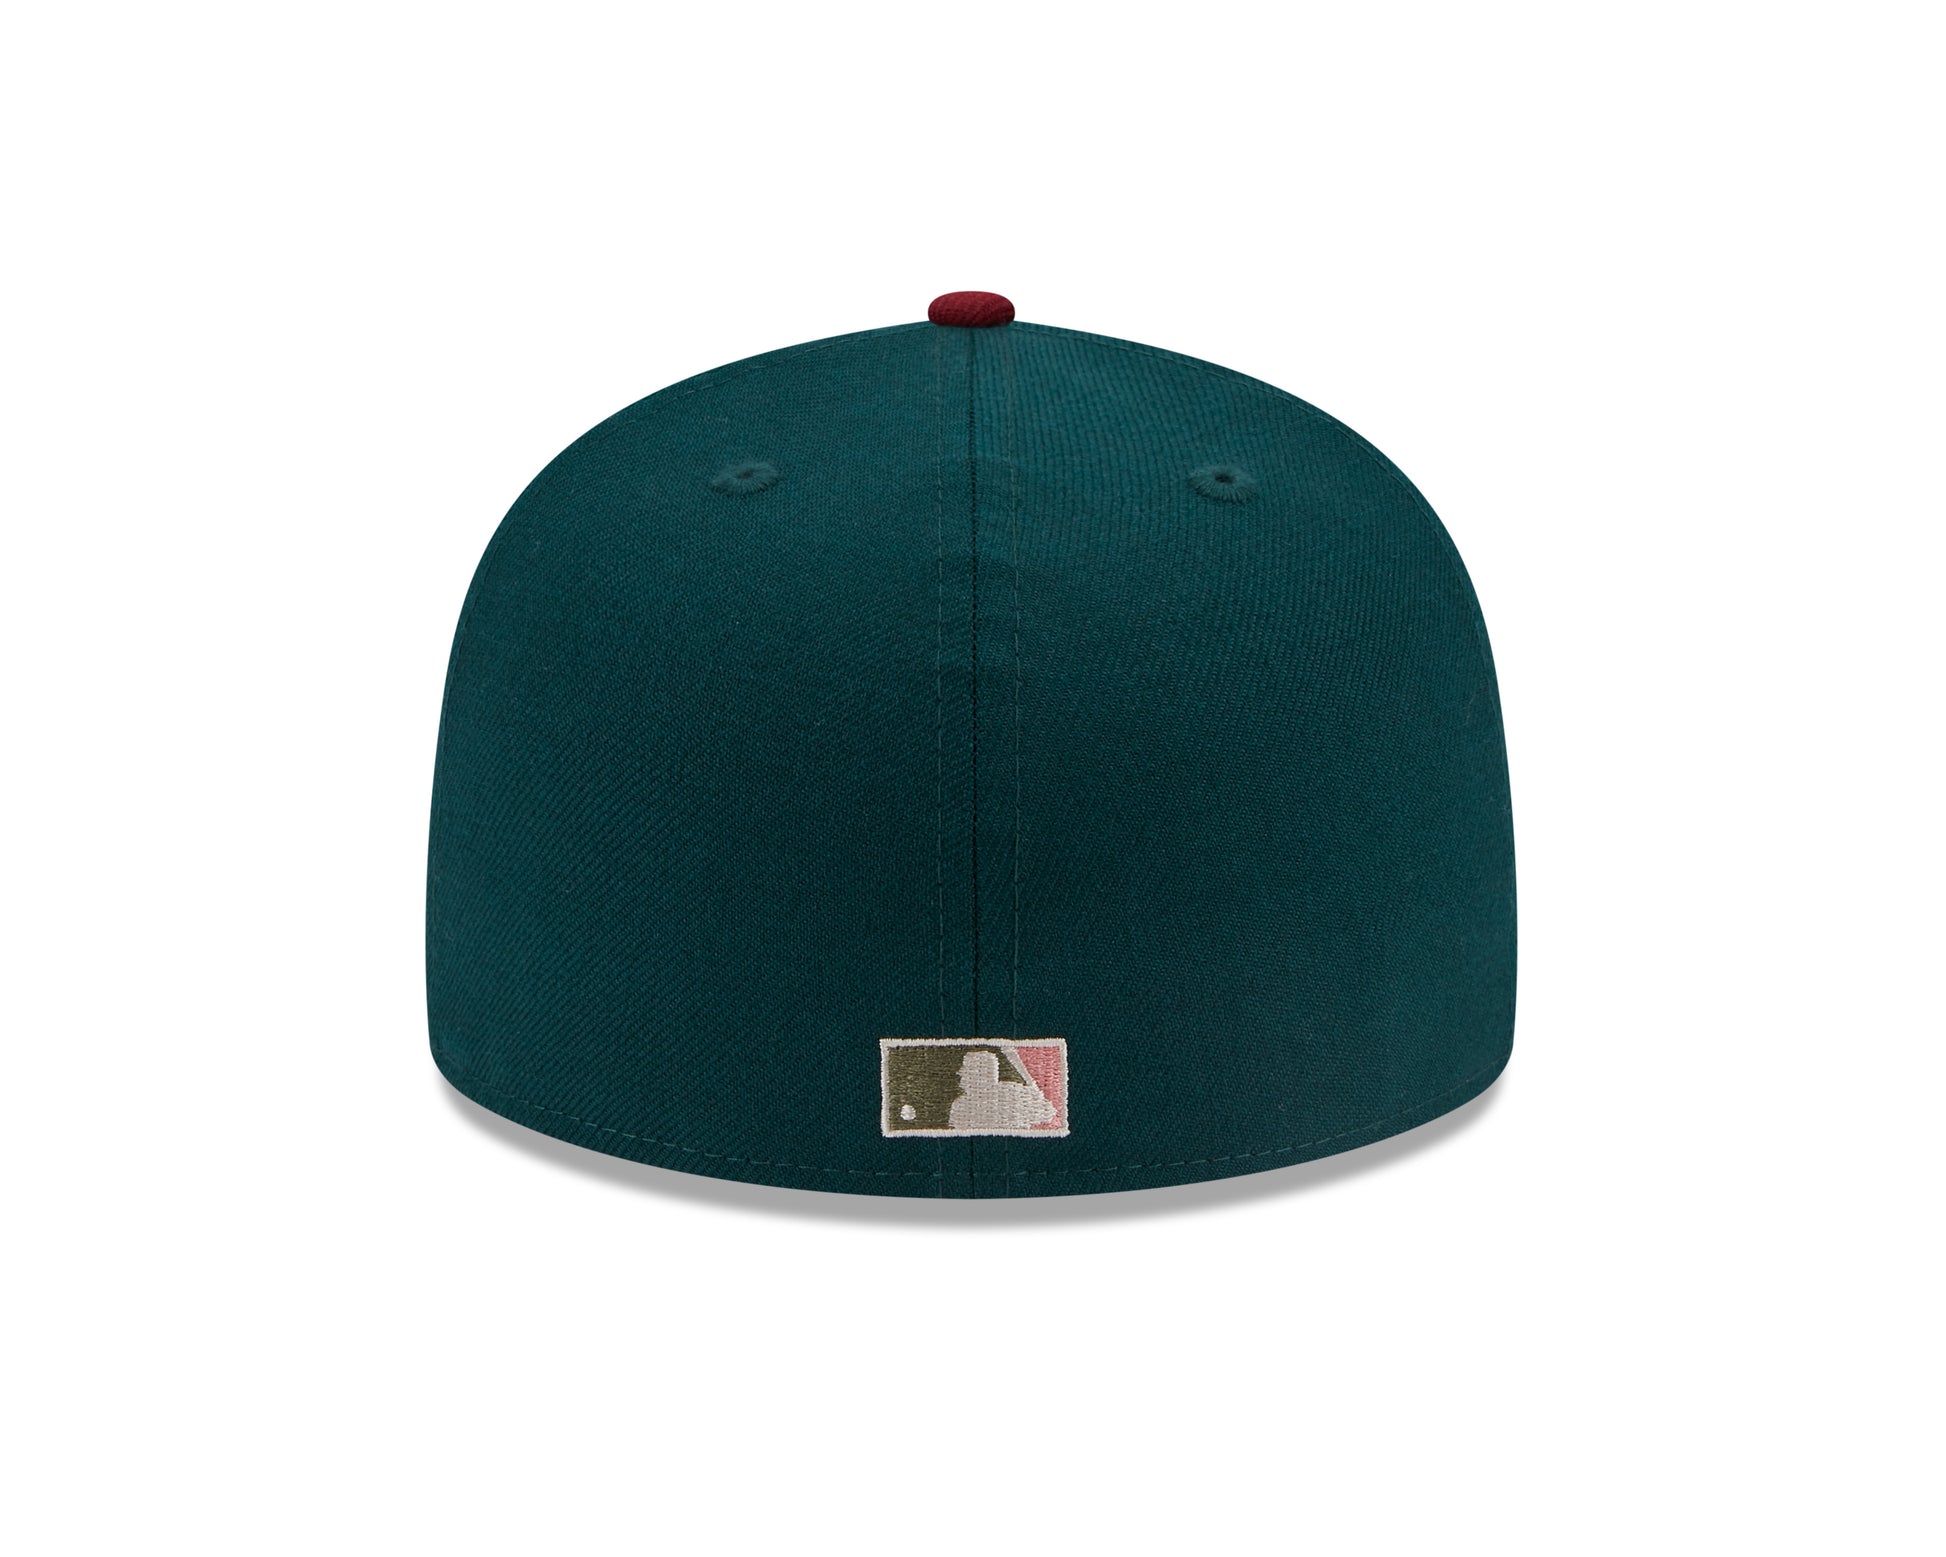 New Era - MLB WS Contrast 59Fifty Fitted - Atlanta Braves - Green/Red - Headz Up 